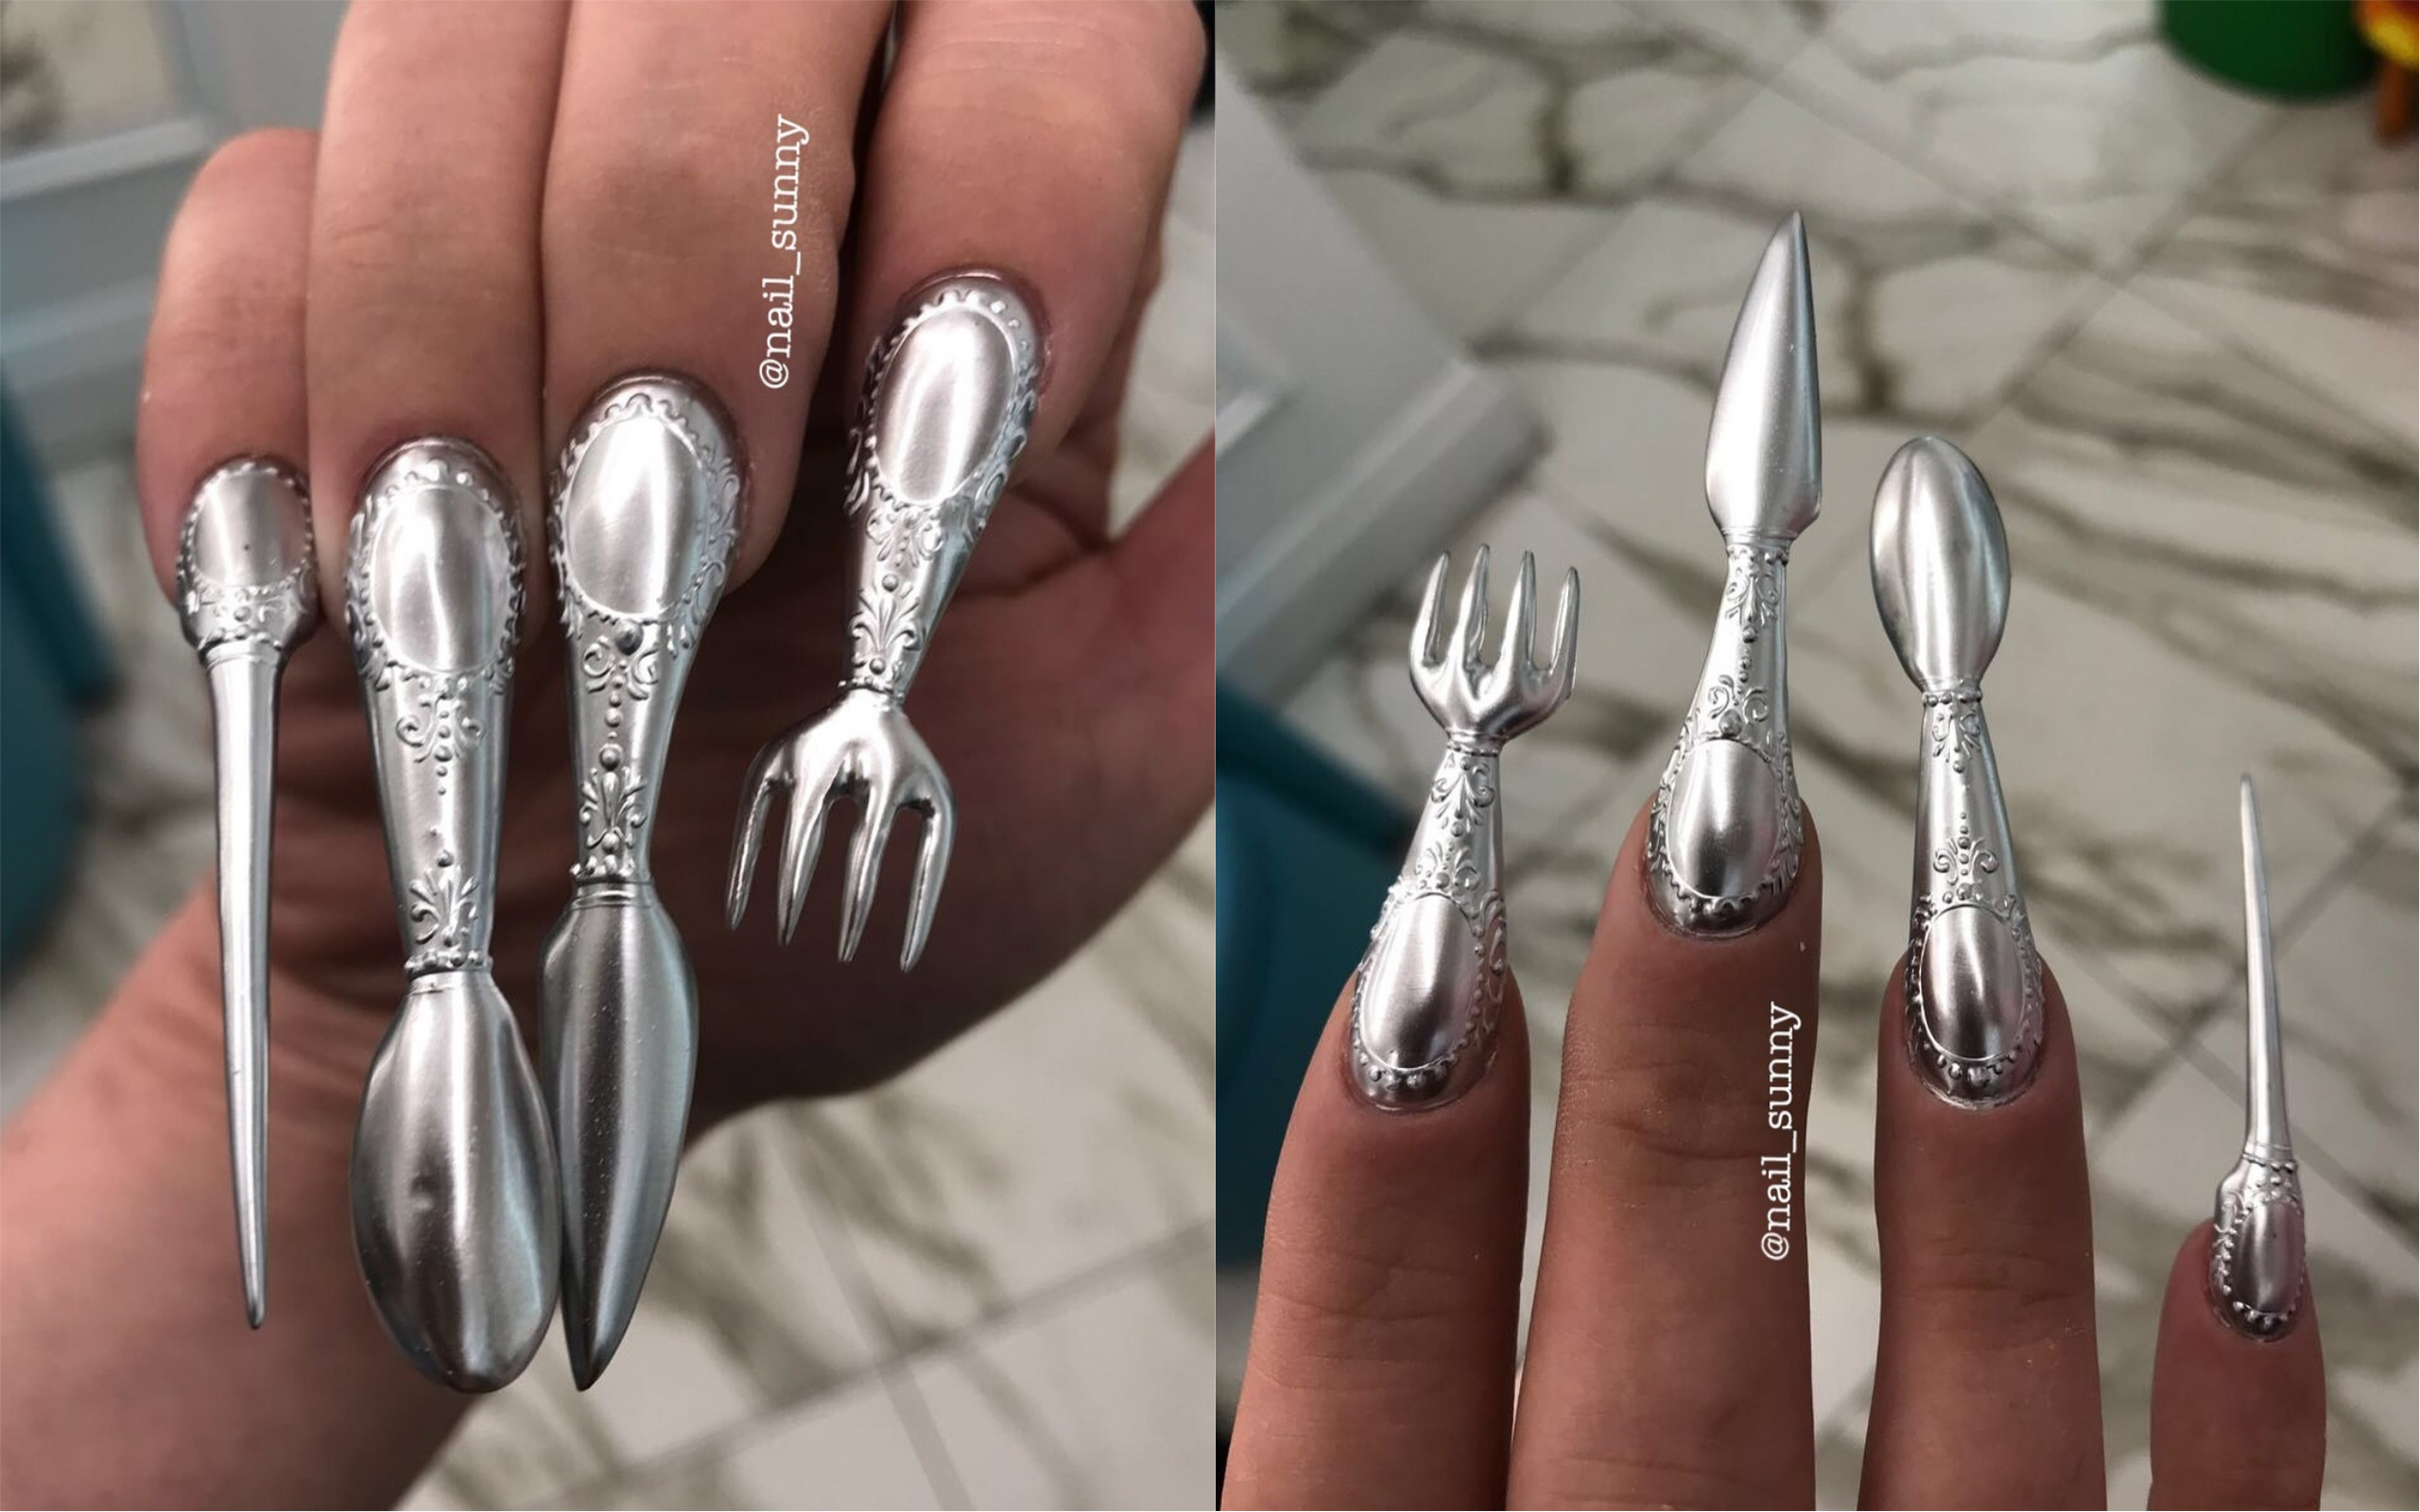 This Nail Salon Will Put An Entire Set Of Usable Cutlery On Your Fingernails